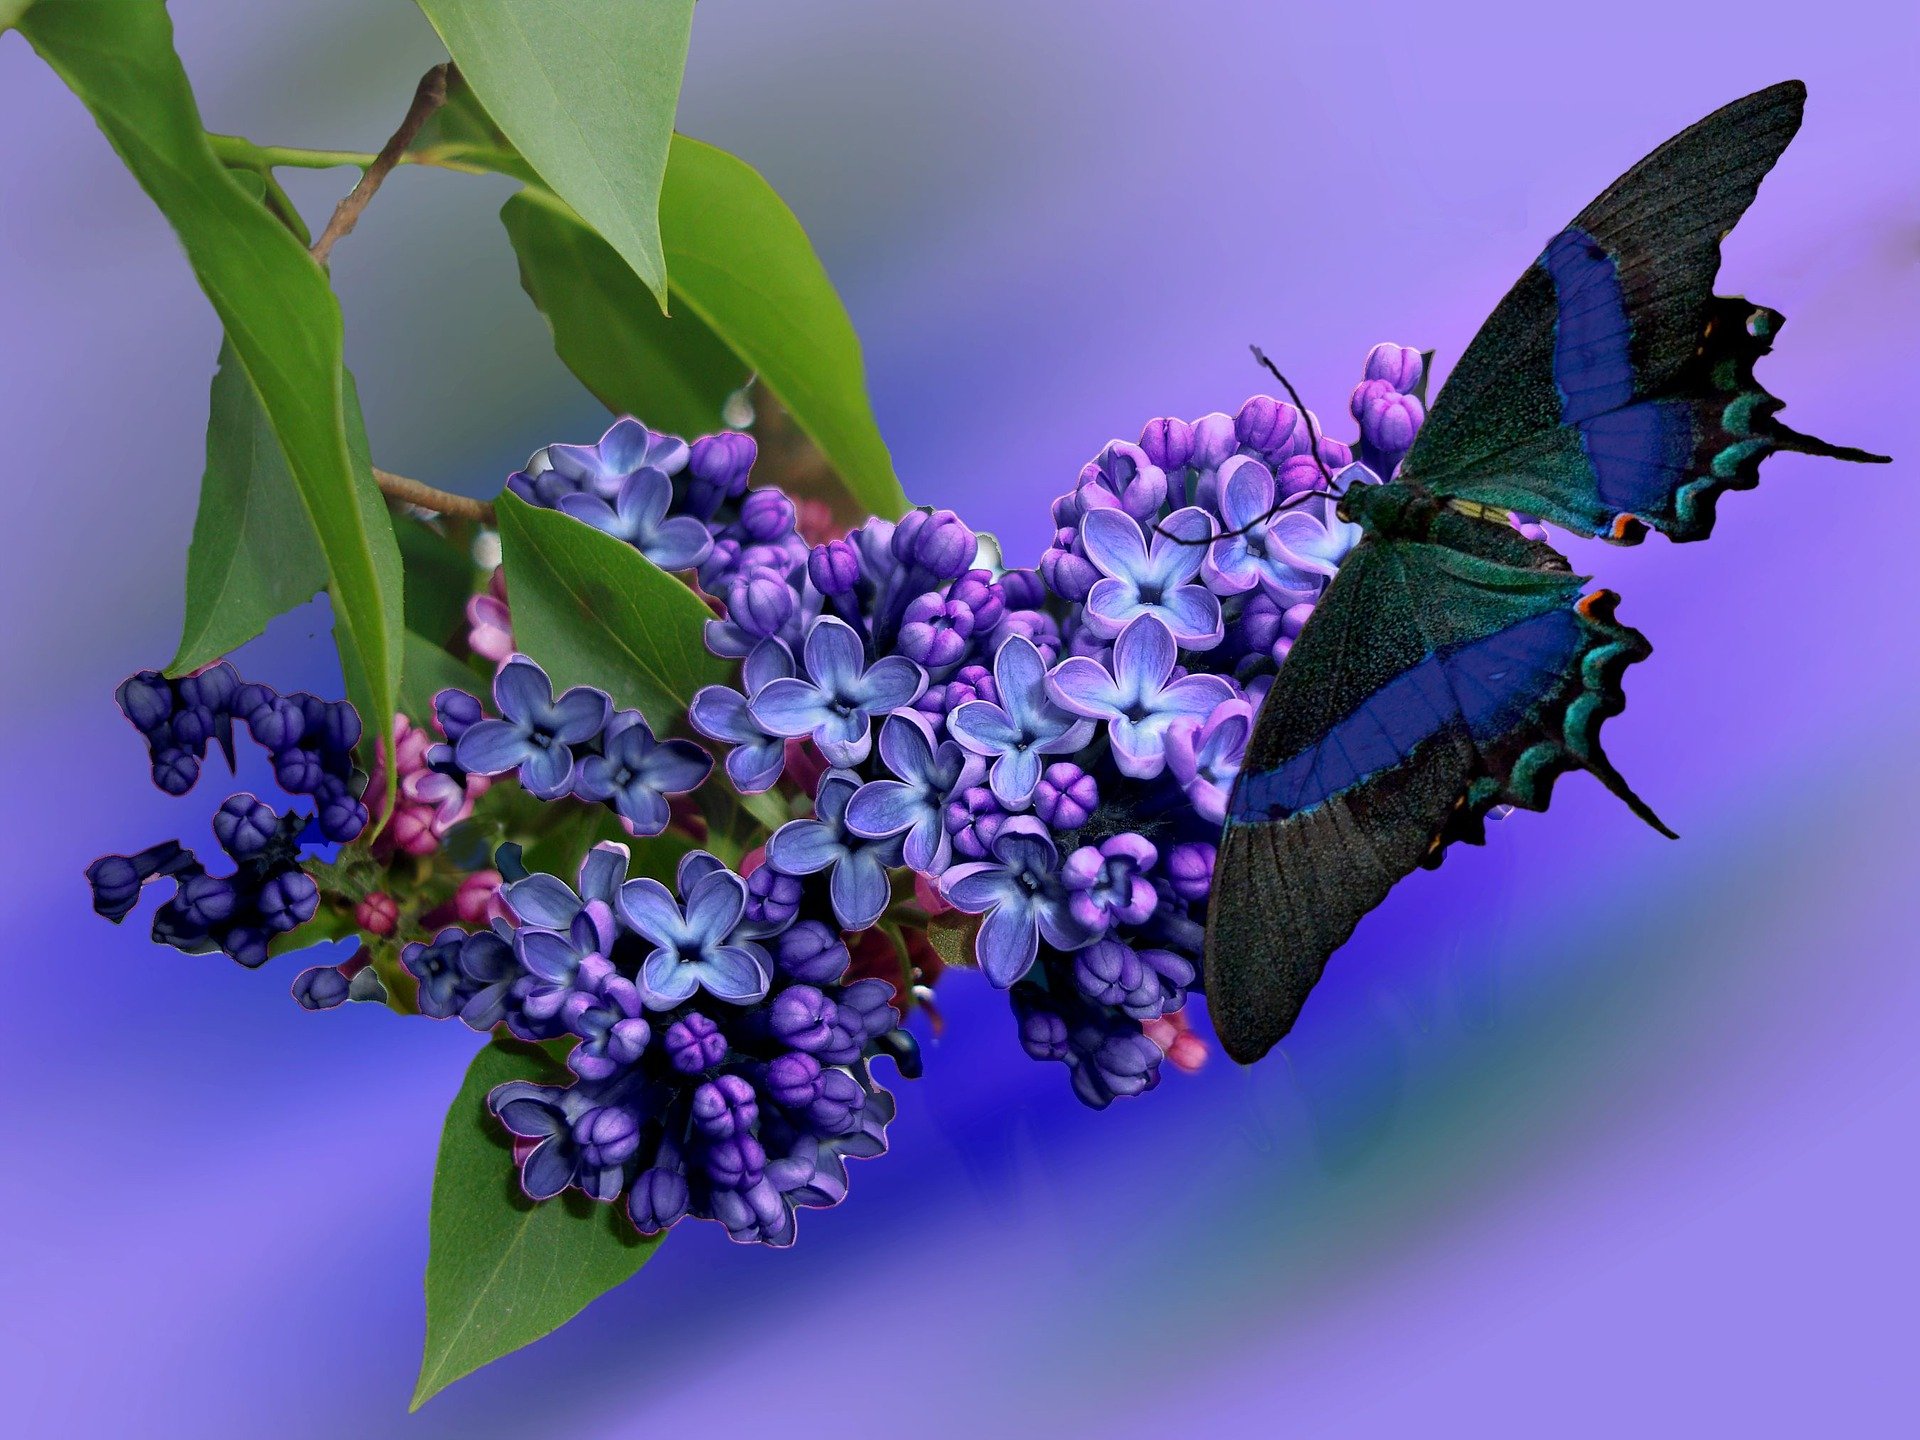 A butterfly on lilac flowers